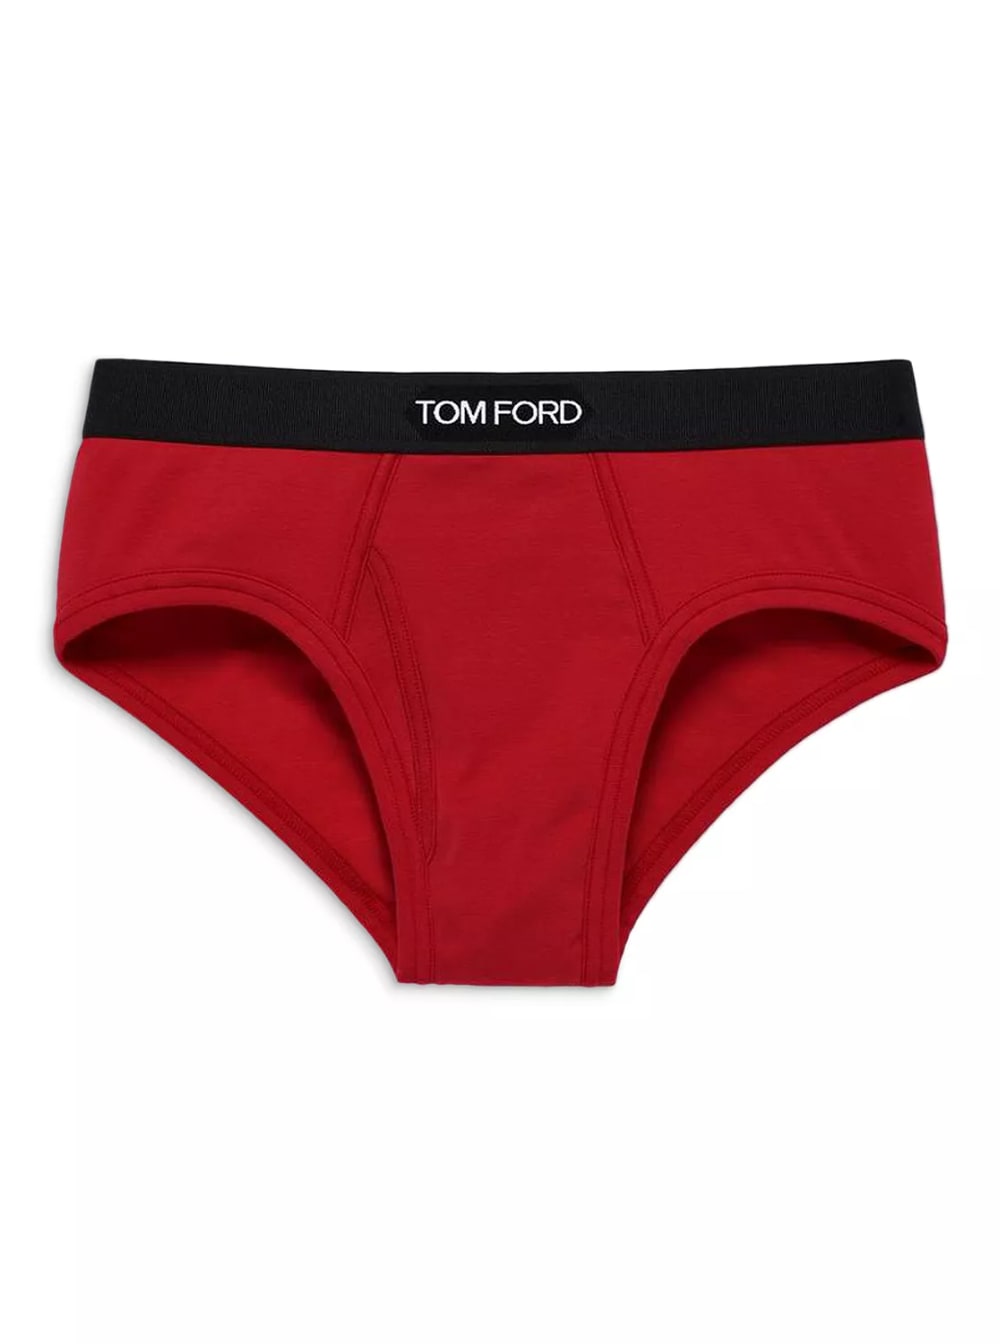 TOM FORD TOM FORD MAN S BICOLOR COTTON BRIEFS WITH LOGO